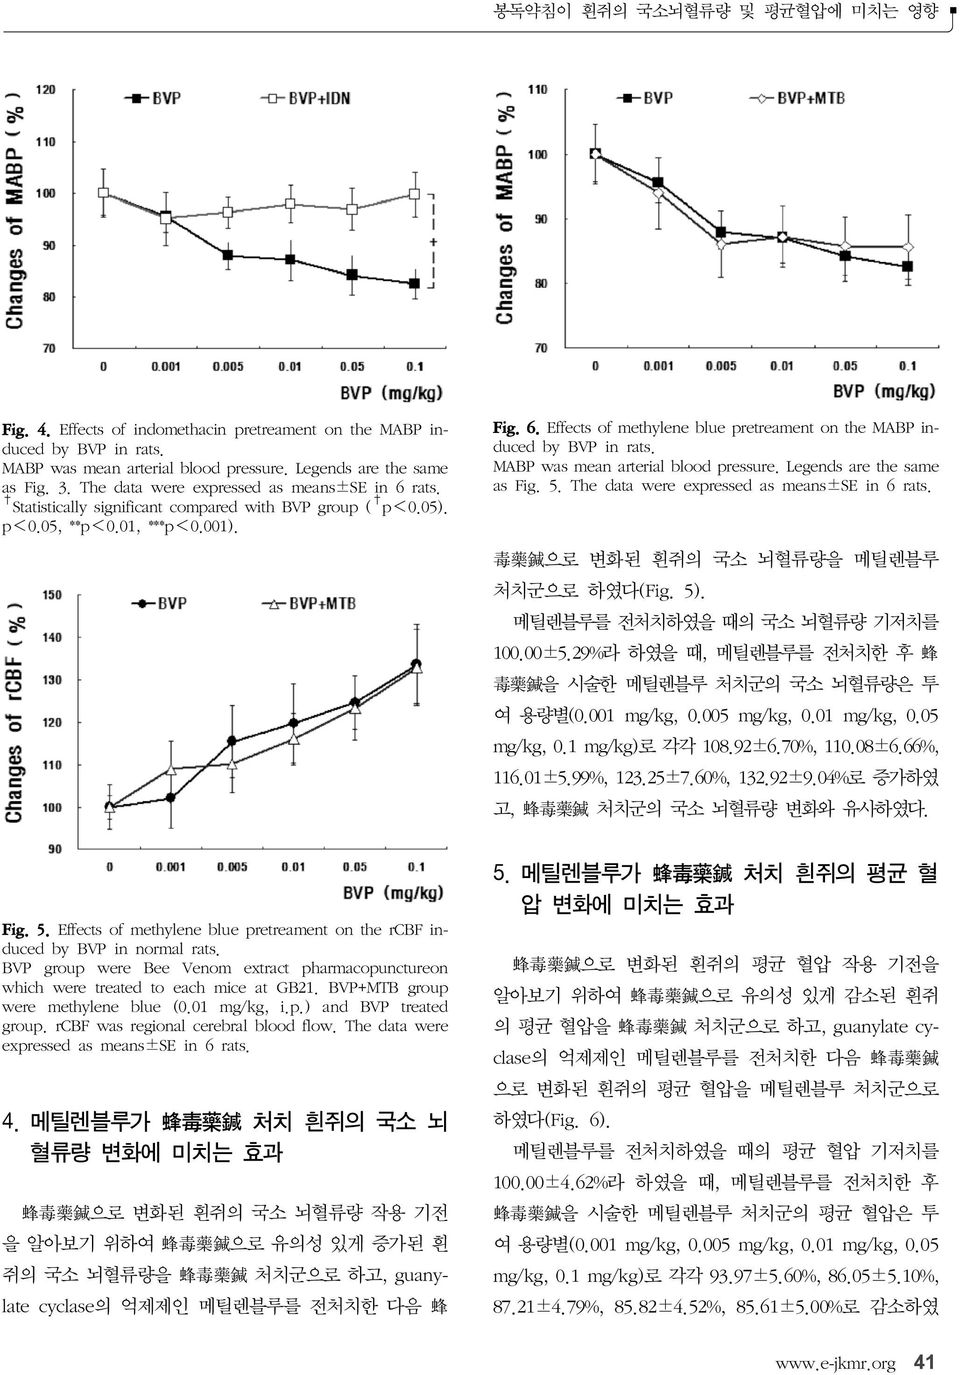 MABP was mean arterial blood pressure. Legends are the same as Fig. 5. The data were expressed as means±se in 6 rats. 毒 藥 鍼 으로 변화된 흰쥐의 국소 뇌혈류량을 메틸렌블루 처치군으로 하였다(Fig. 5).